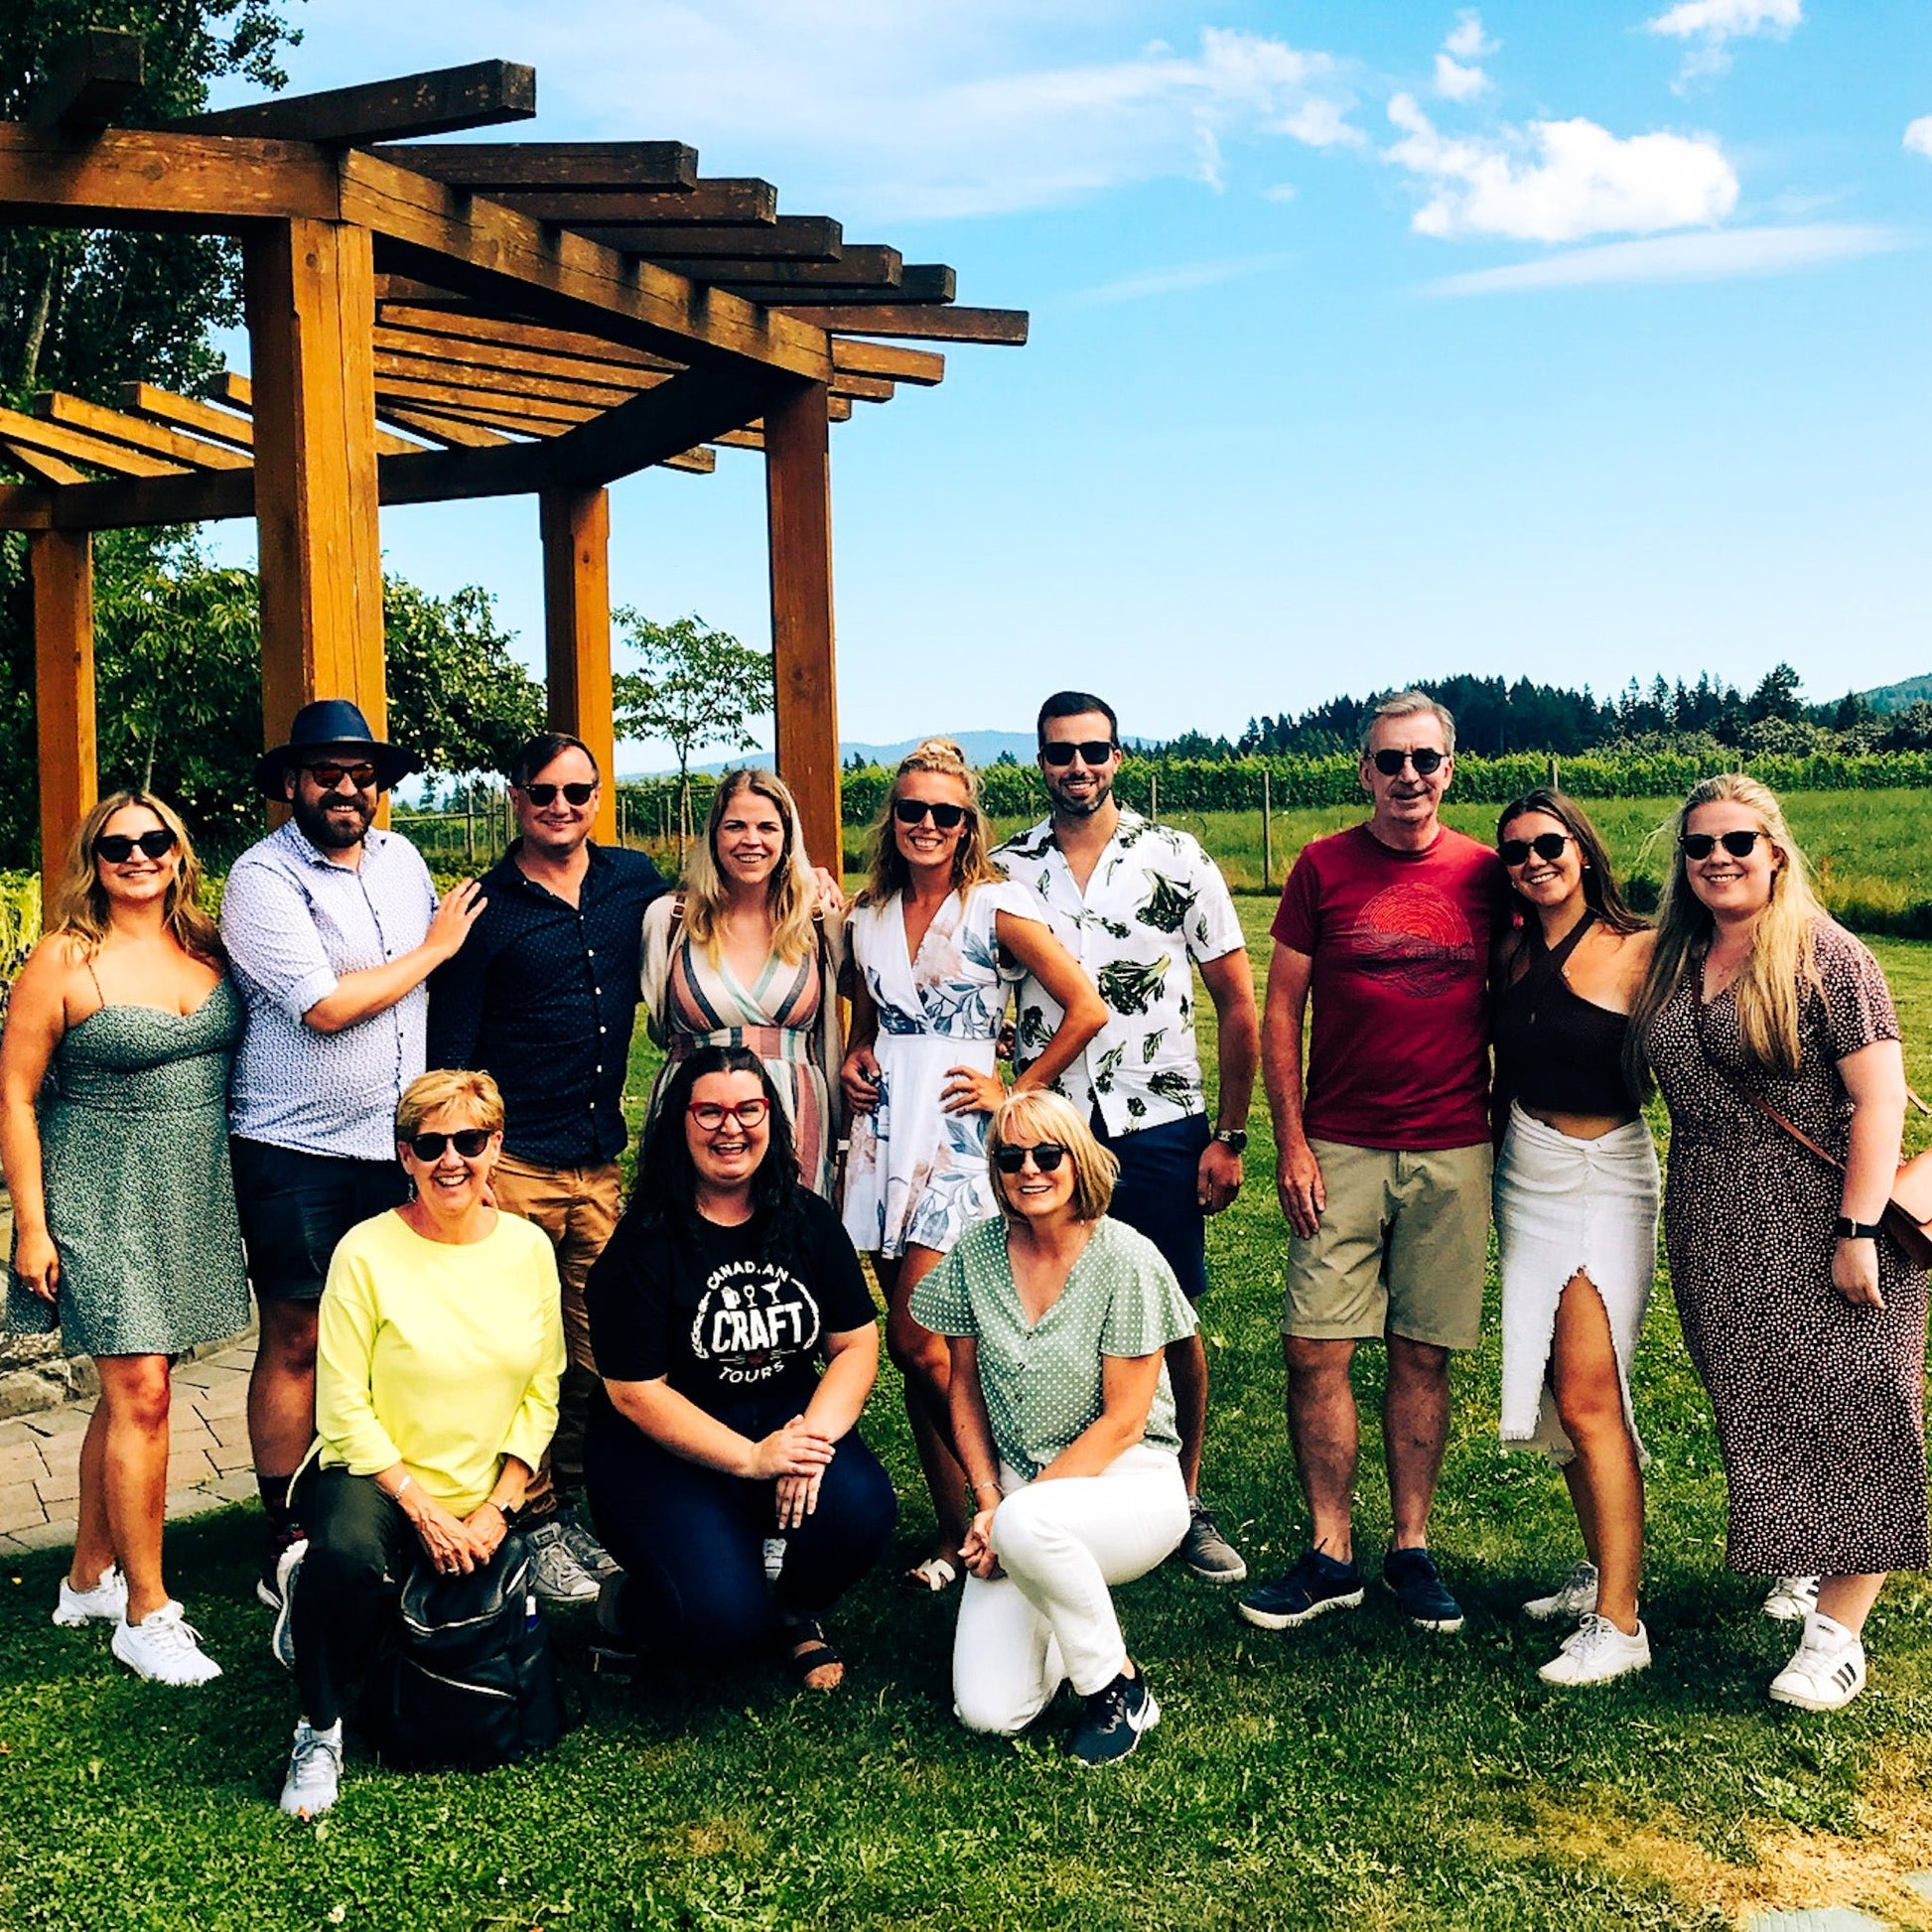 Cowichan Valley Wine Tour Group At Unsworth